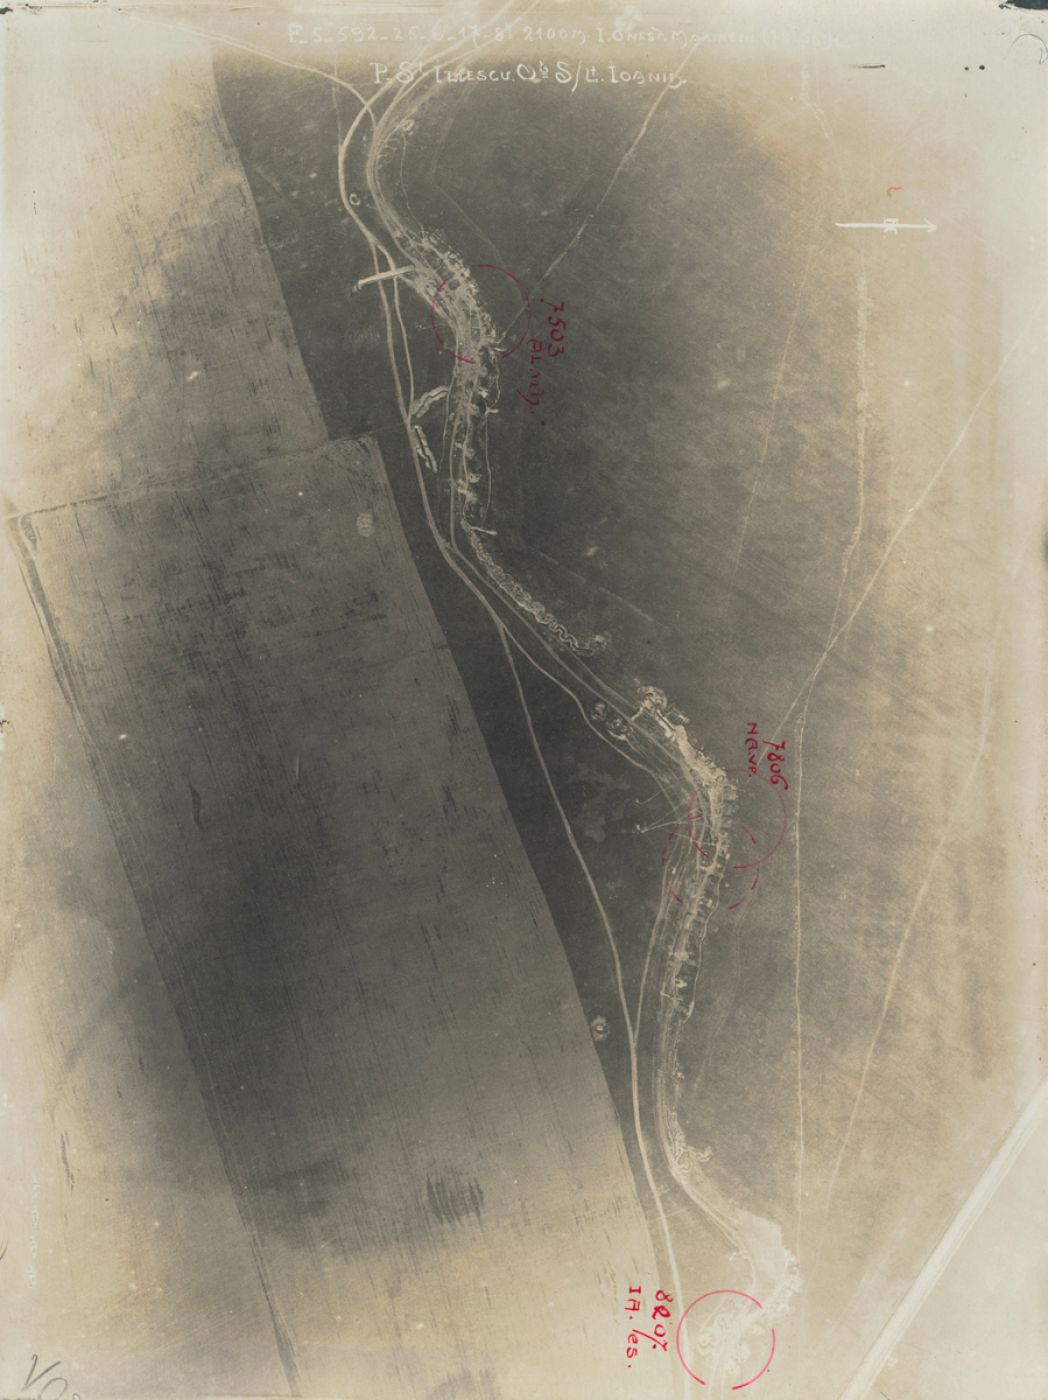 S. Lt. Ioanid, “WW1 trench (aerial photography)”, 1917